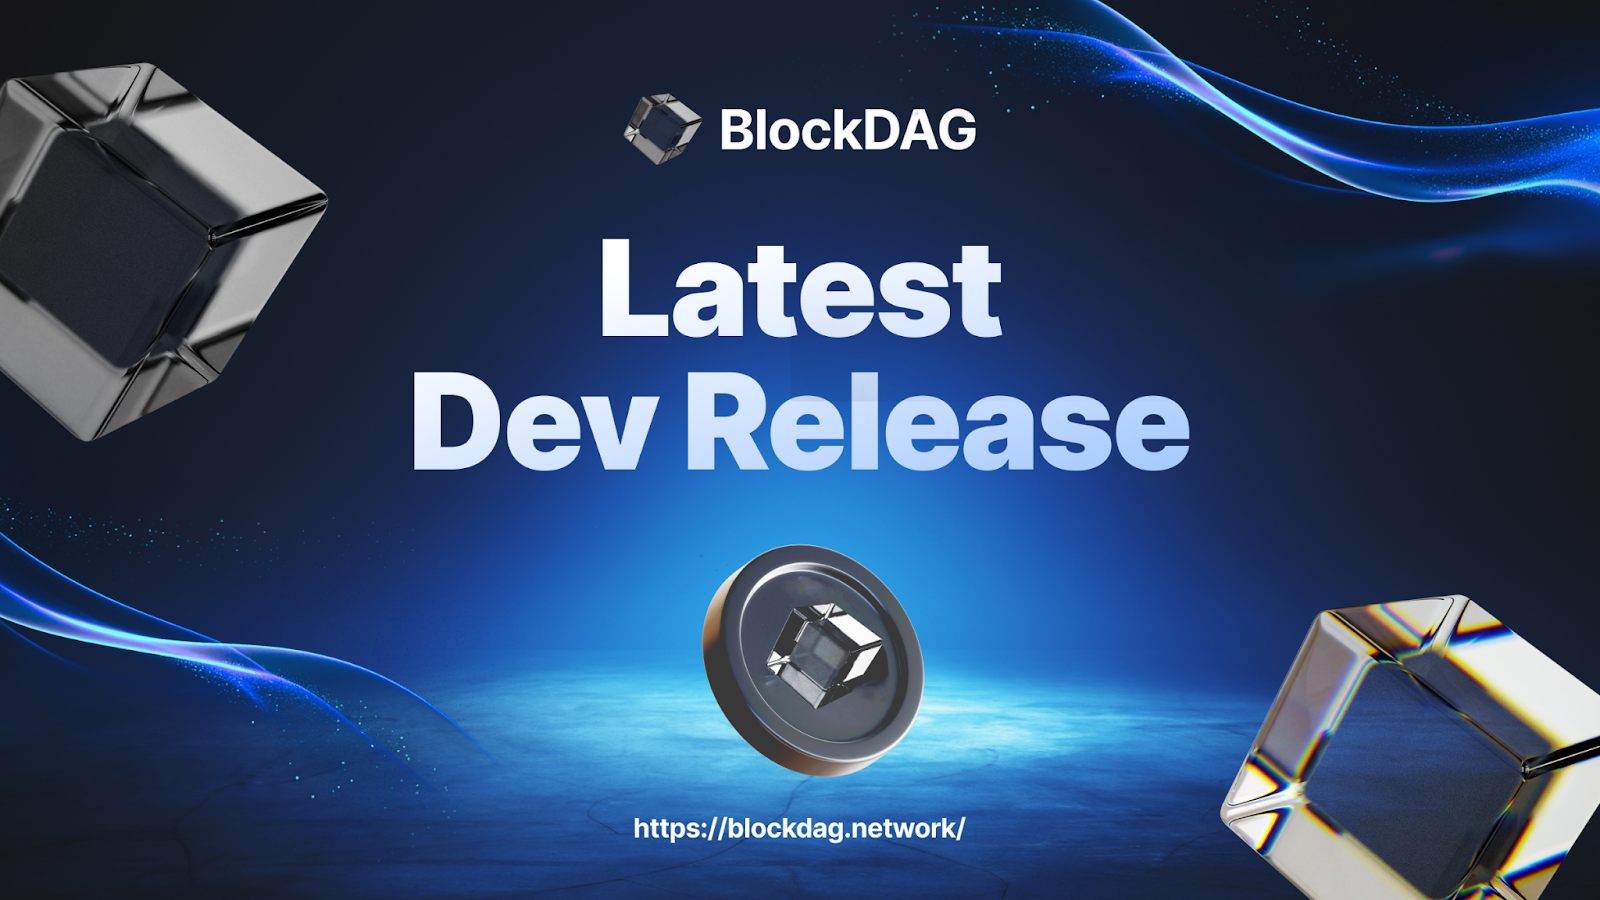 BlockDAG’s Dev Release 78: X1 Miner App & Blockchain Upgrades Set Stage for Leadership Intro, Boosting Growth by 1400%